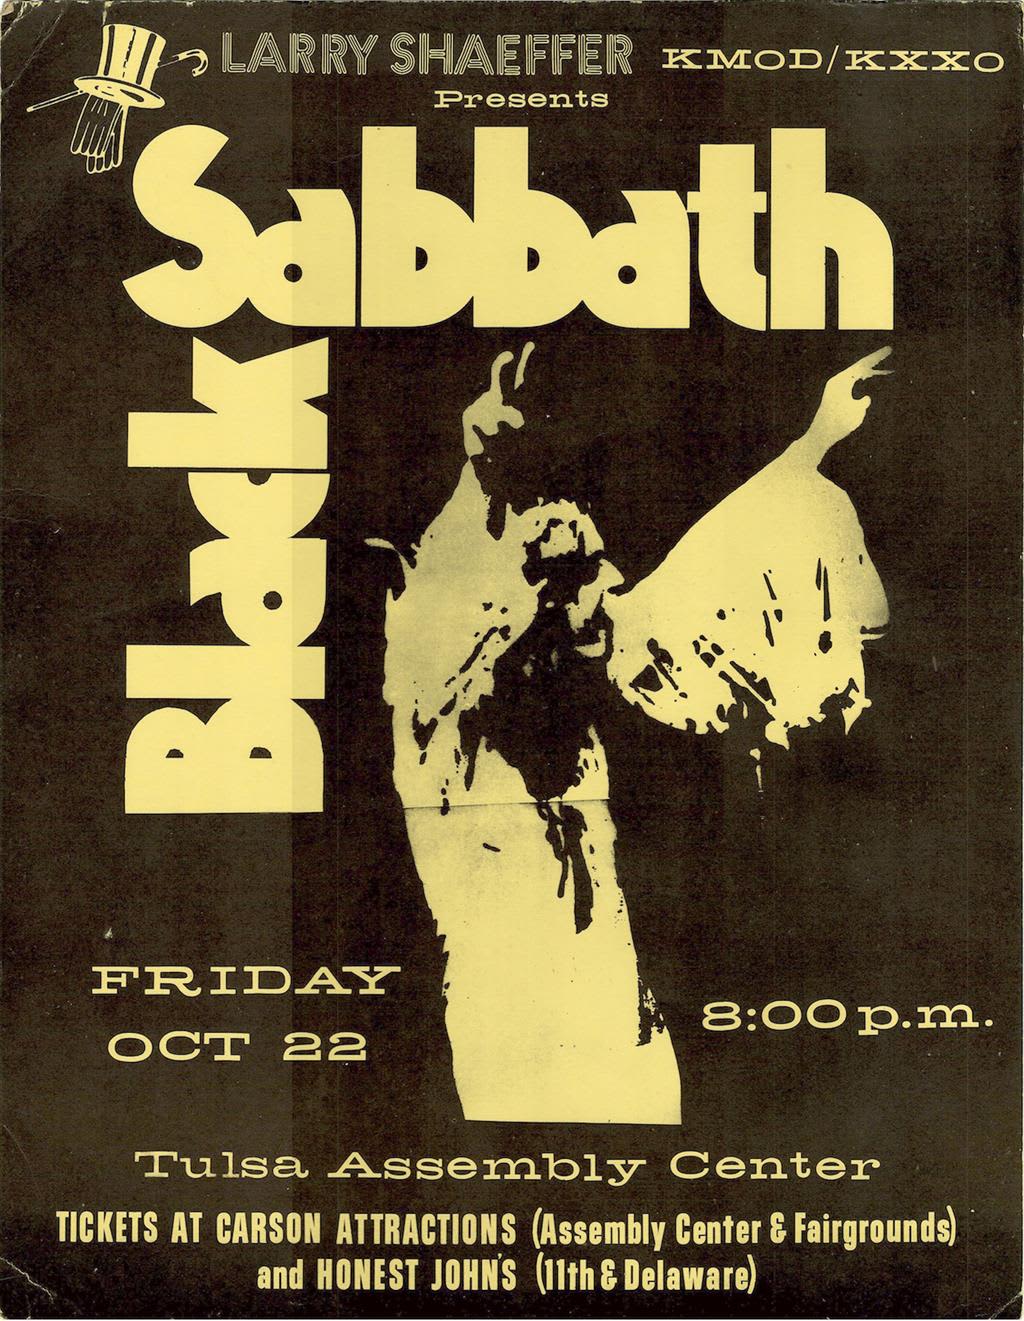 Bob Pisani: A Black Sabbath poster showed how irrational we can be when  investing